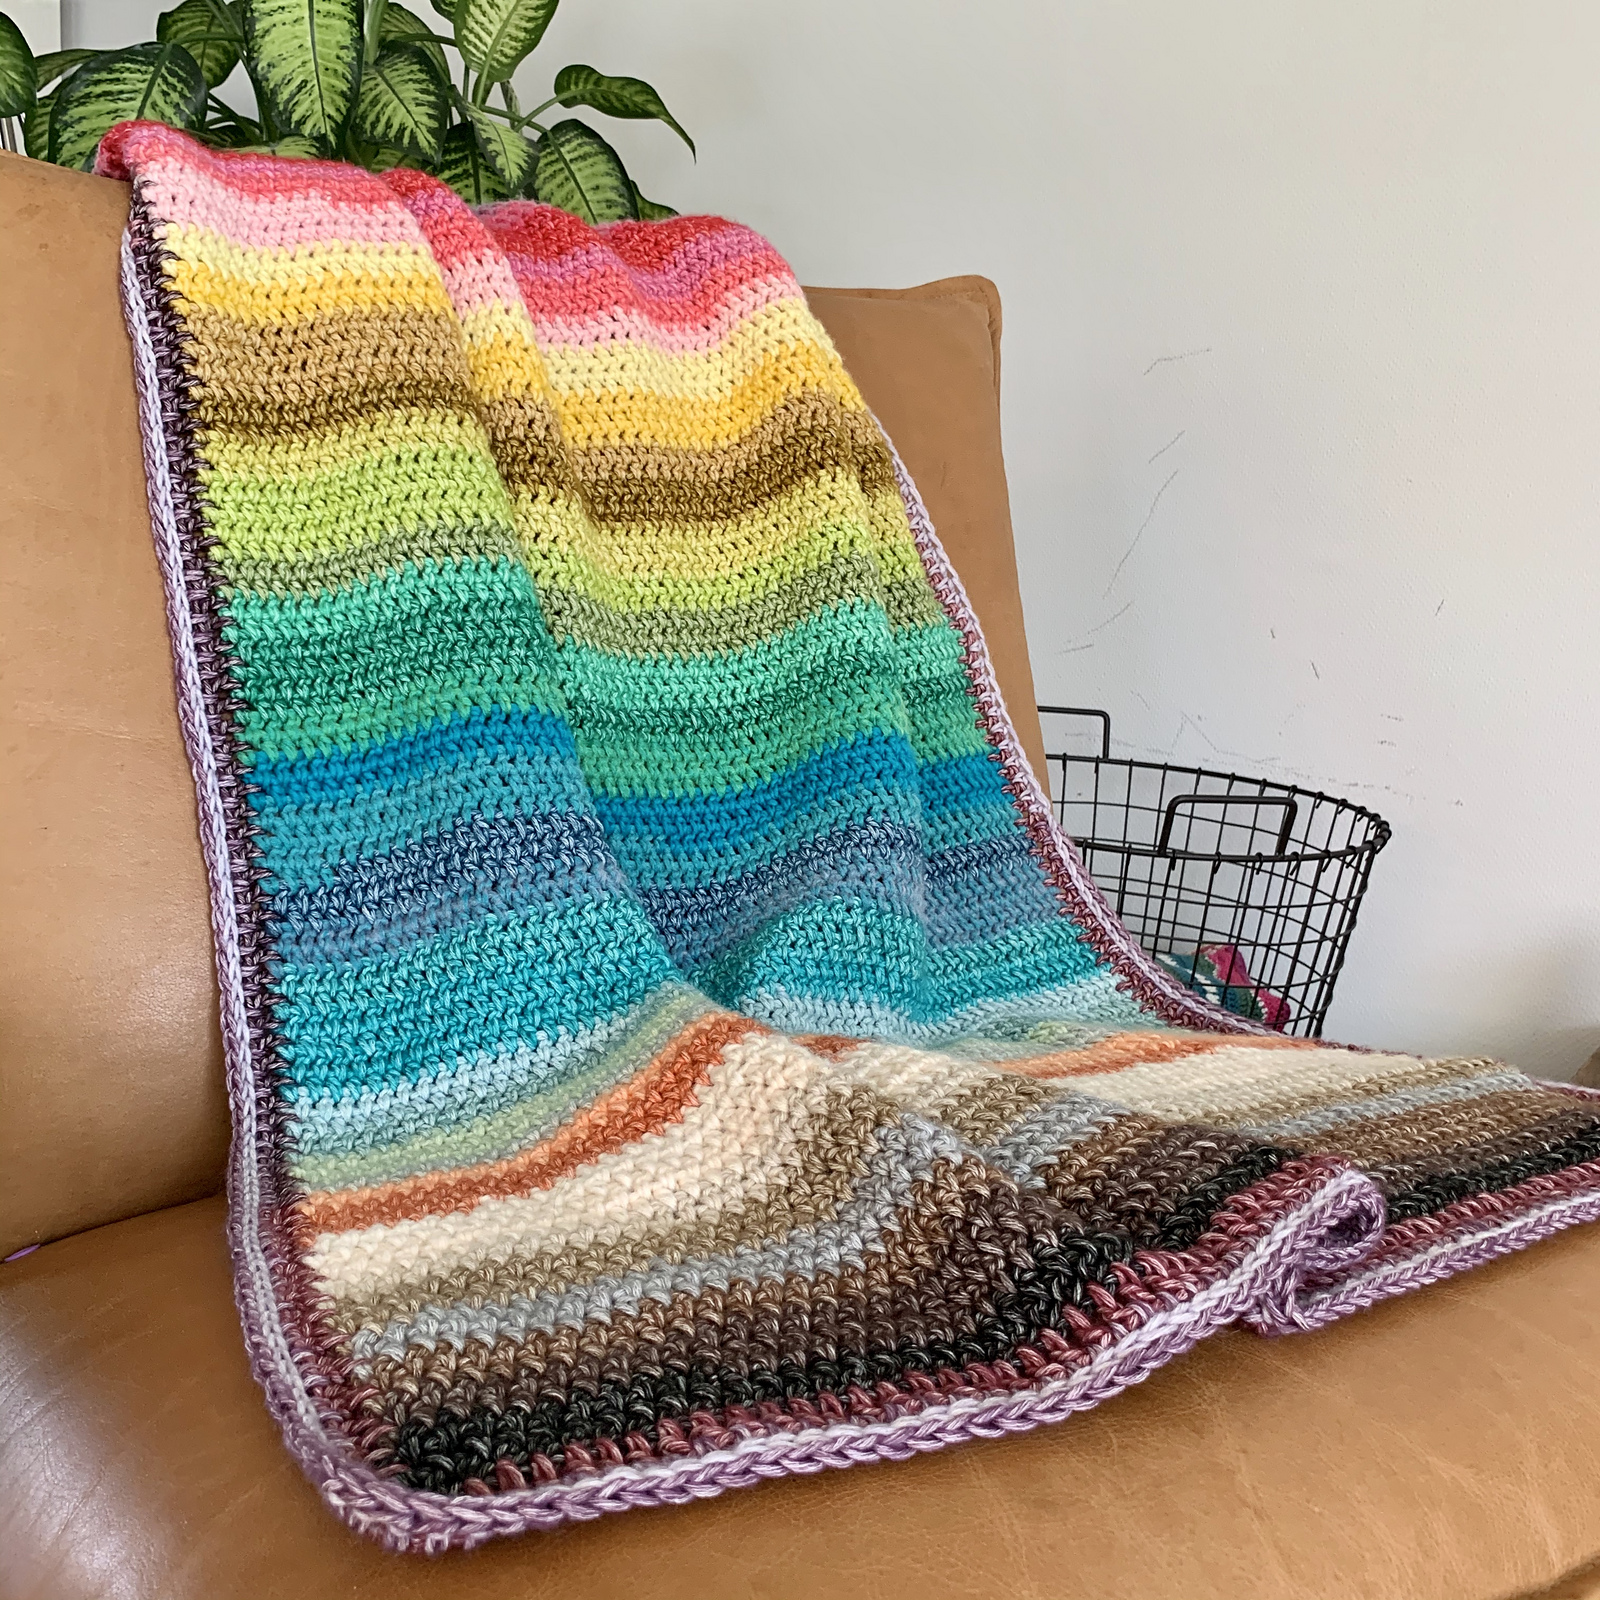 quick-and-easy-crochet-blanket-pattern-images